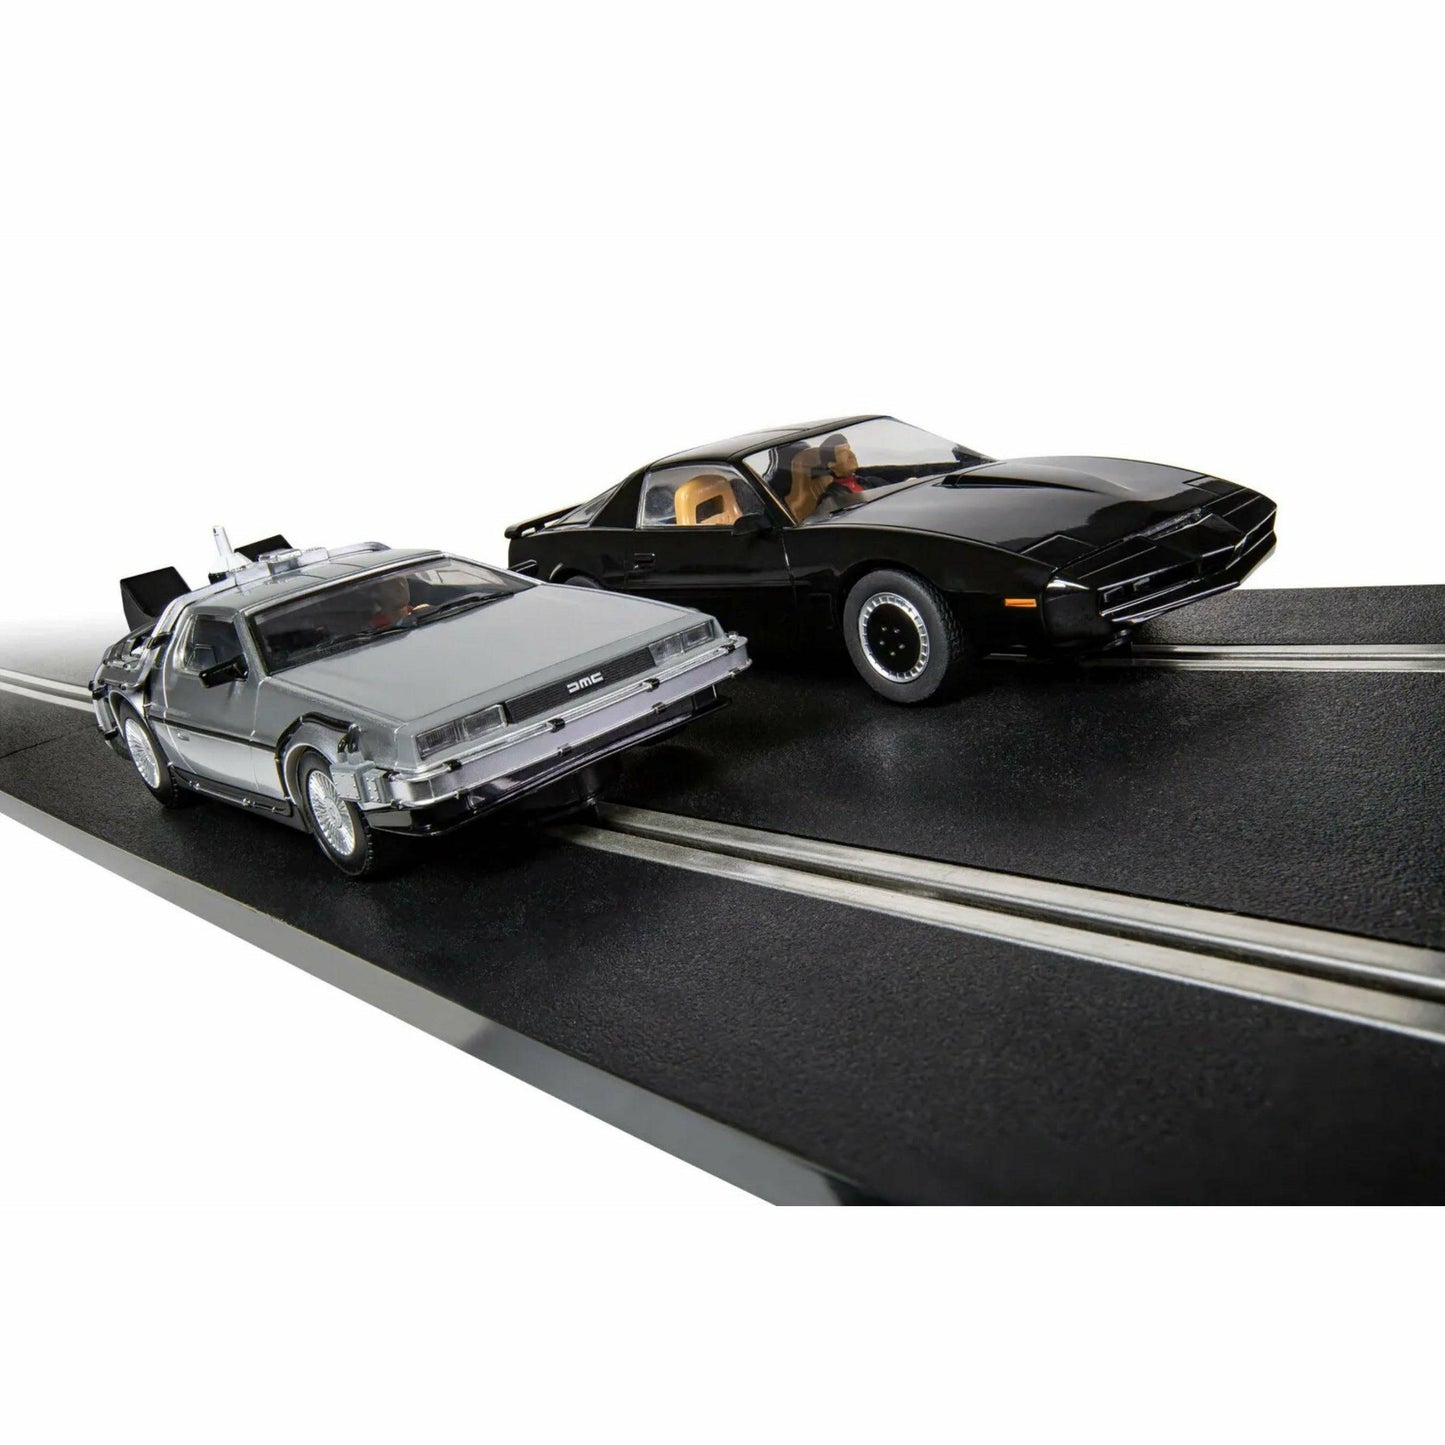 Scalextric 1980's TV - Back to the Future vs Knight Rider 1:32 scale slot car race set Slot Car Scalextric